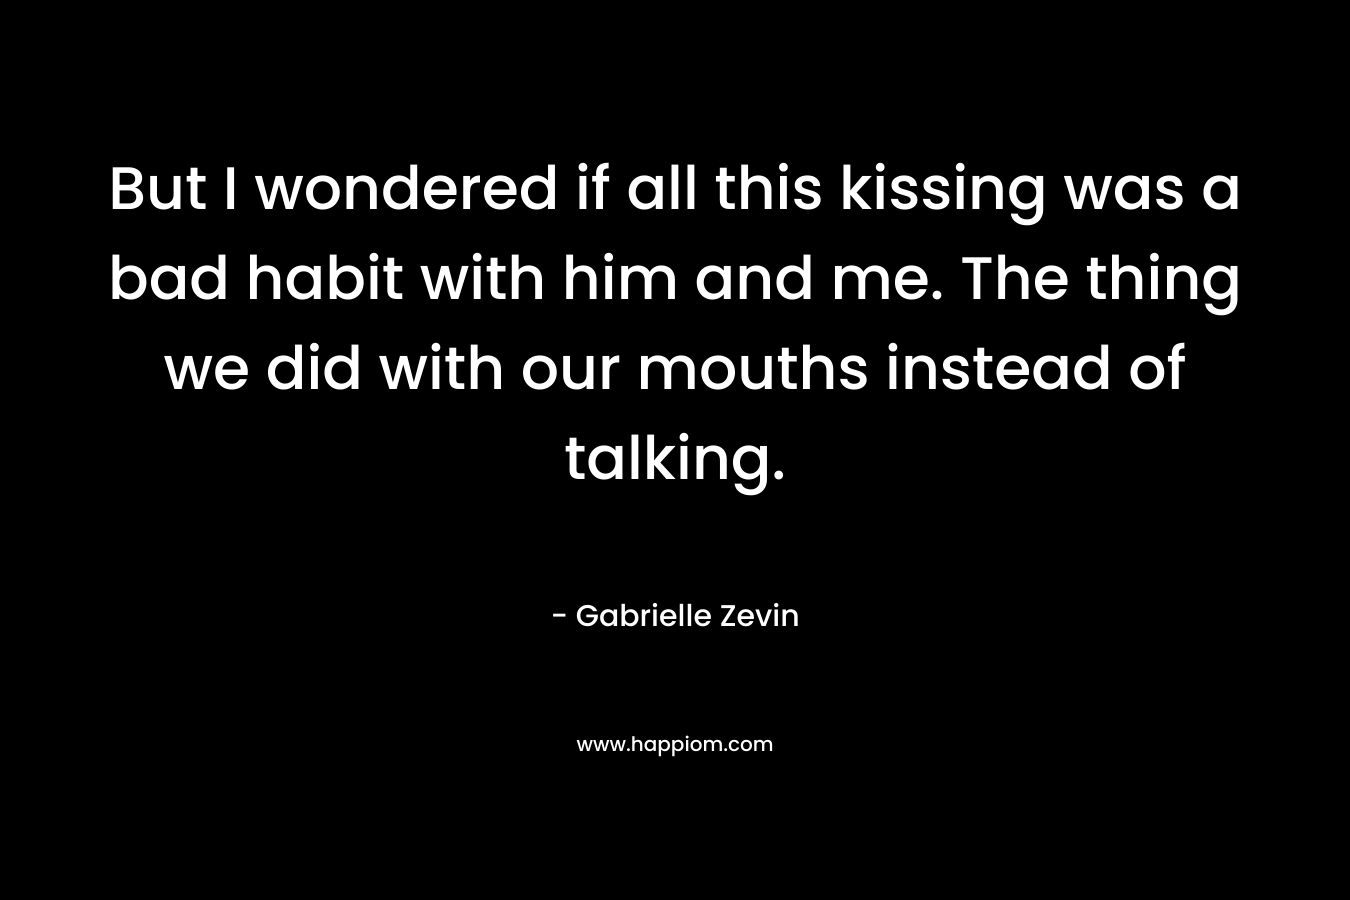 But I wondered if all this kissing was a bad habit with him and me. The thing we did with our mouths instead of talking. – Gabrielle Zevin